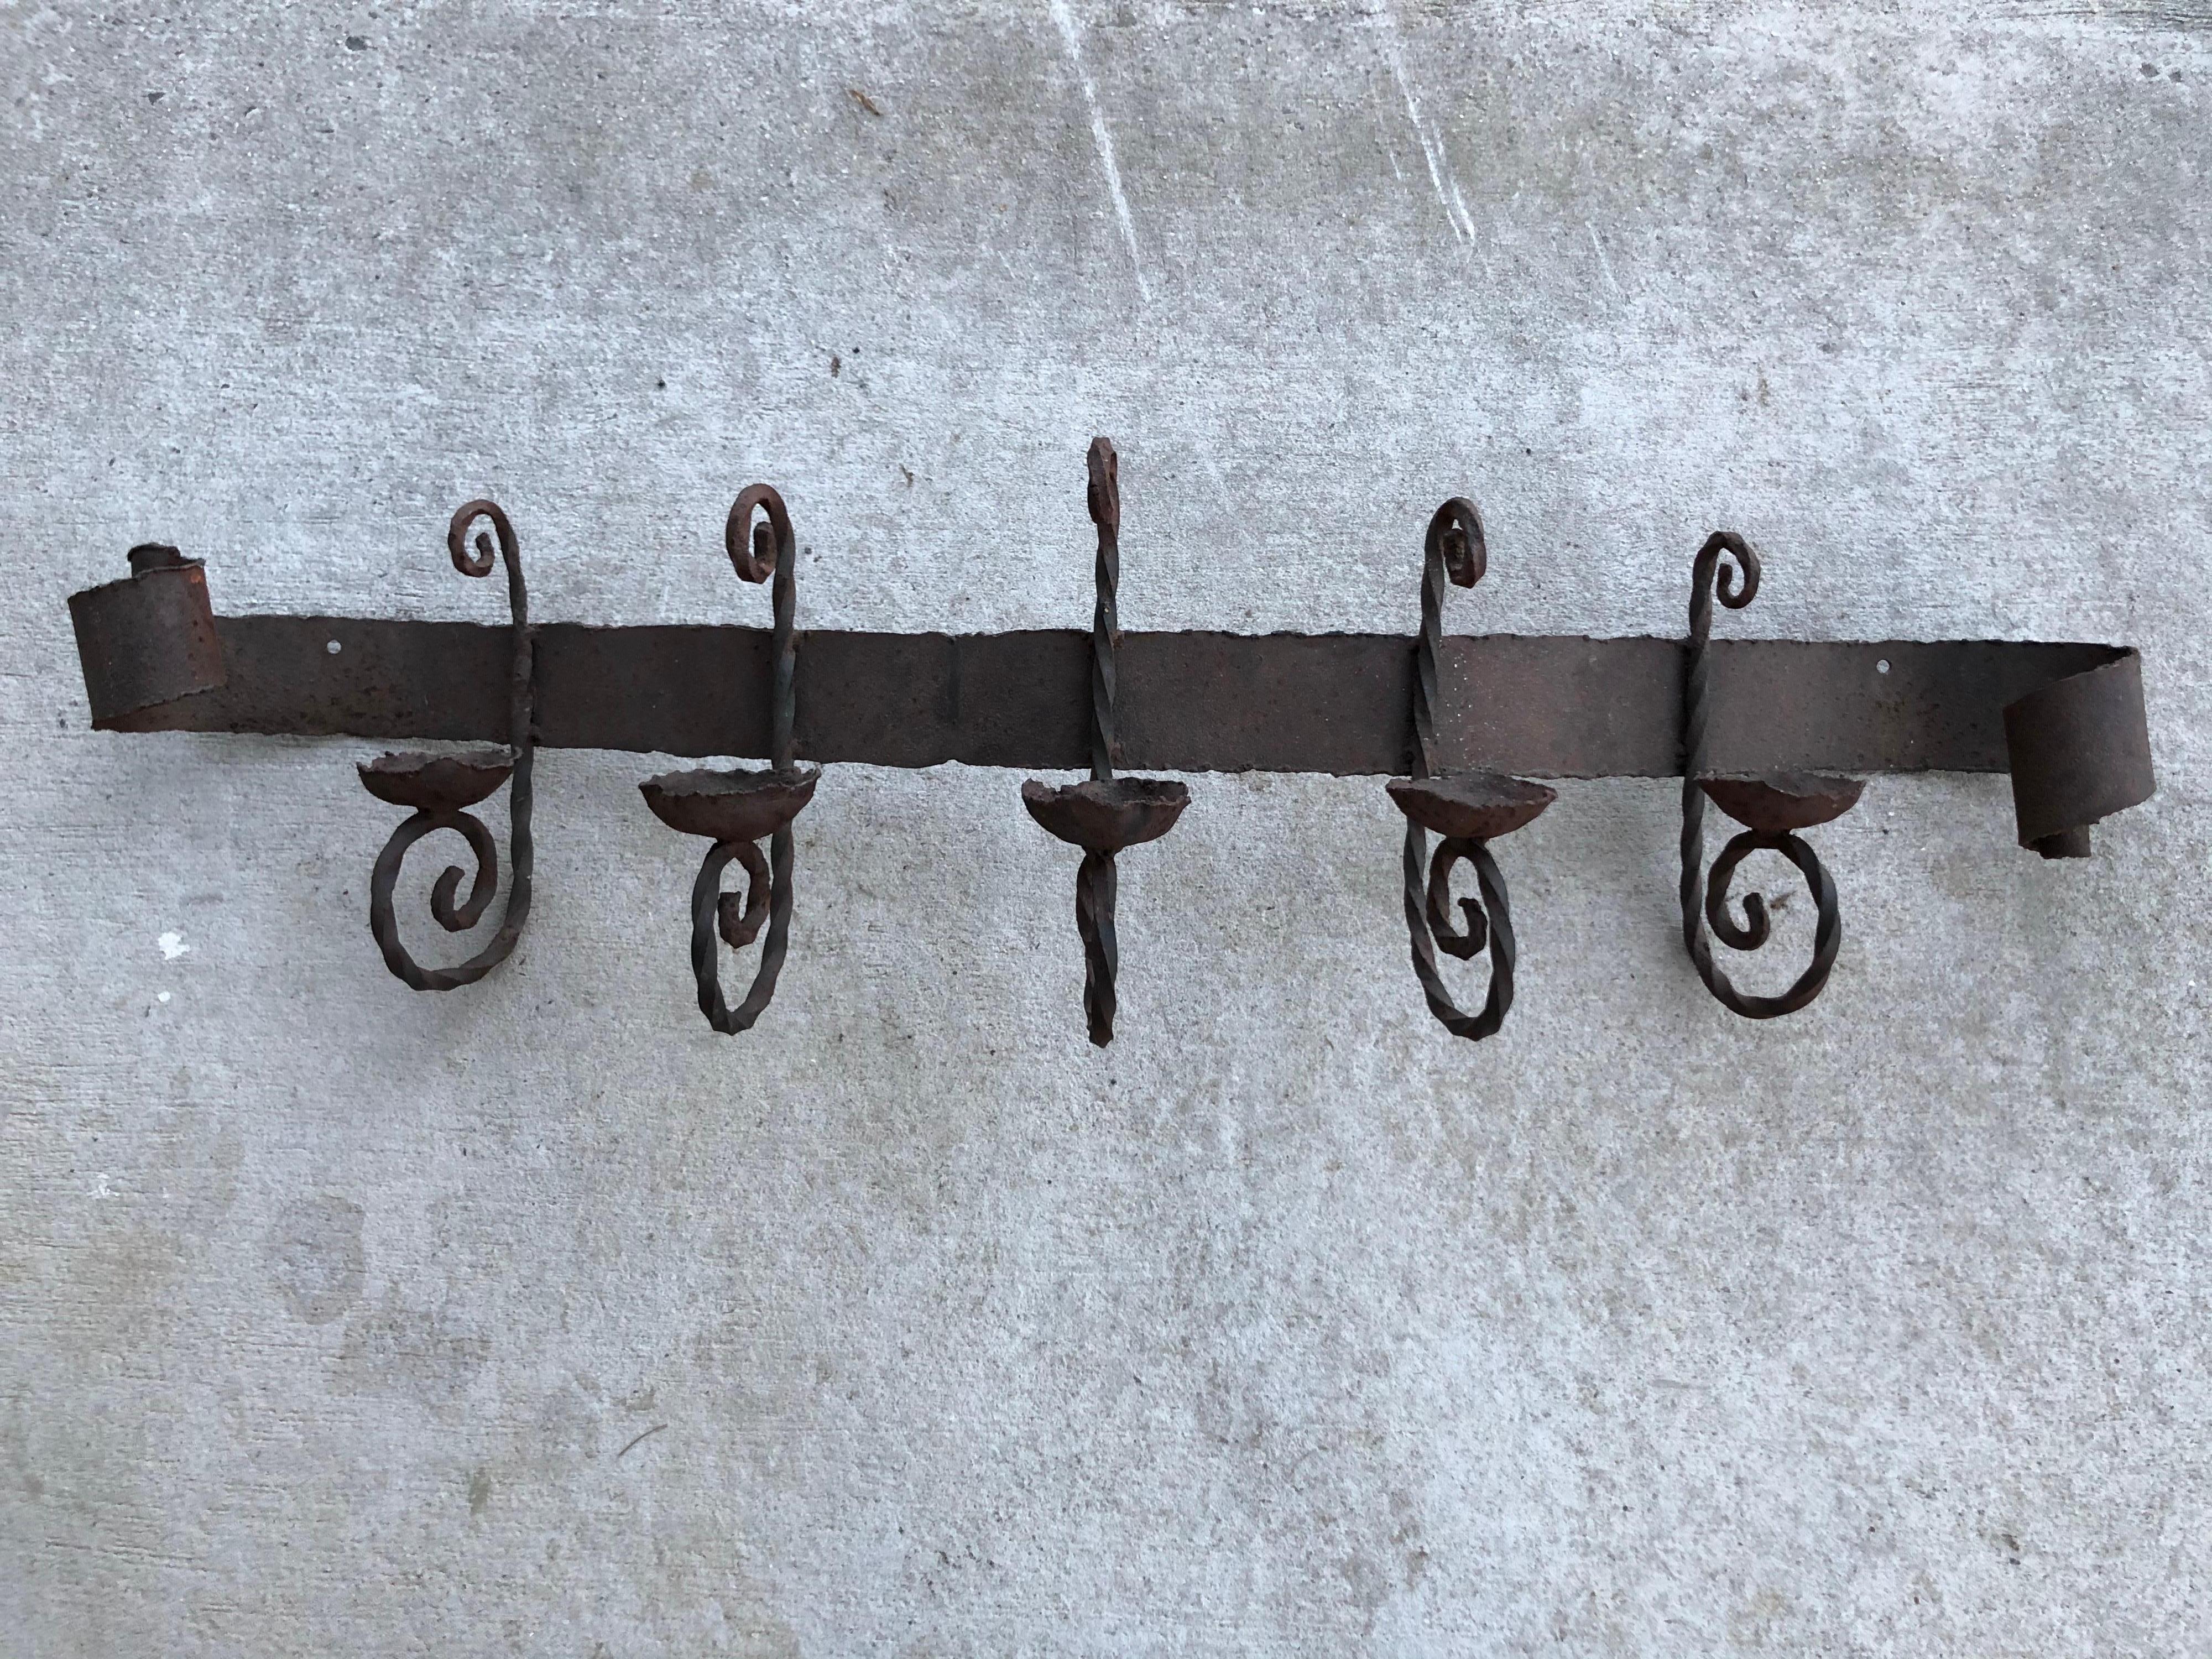 Antique iron wall sconce. Perfect for above a mantel or bed / headboard. Holds 5 candles. All handwrought with rolled scroll like ends and twisted candle holders. Rustic style perfect for that stucco style hacienda. Arched back. Attaches to wall on